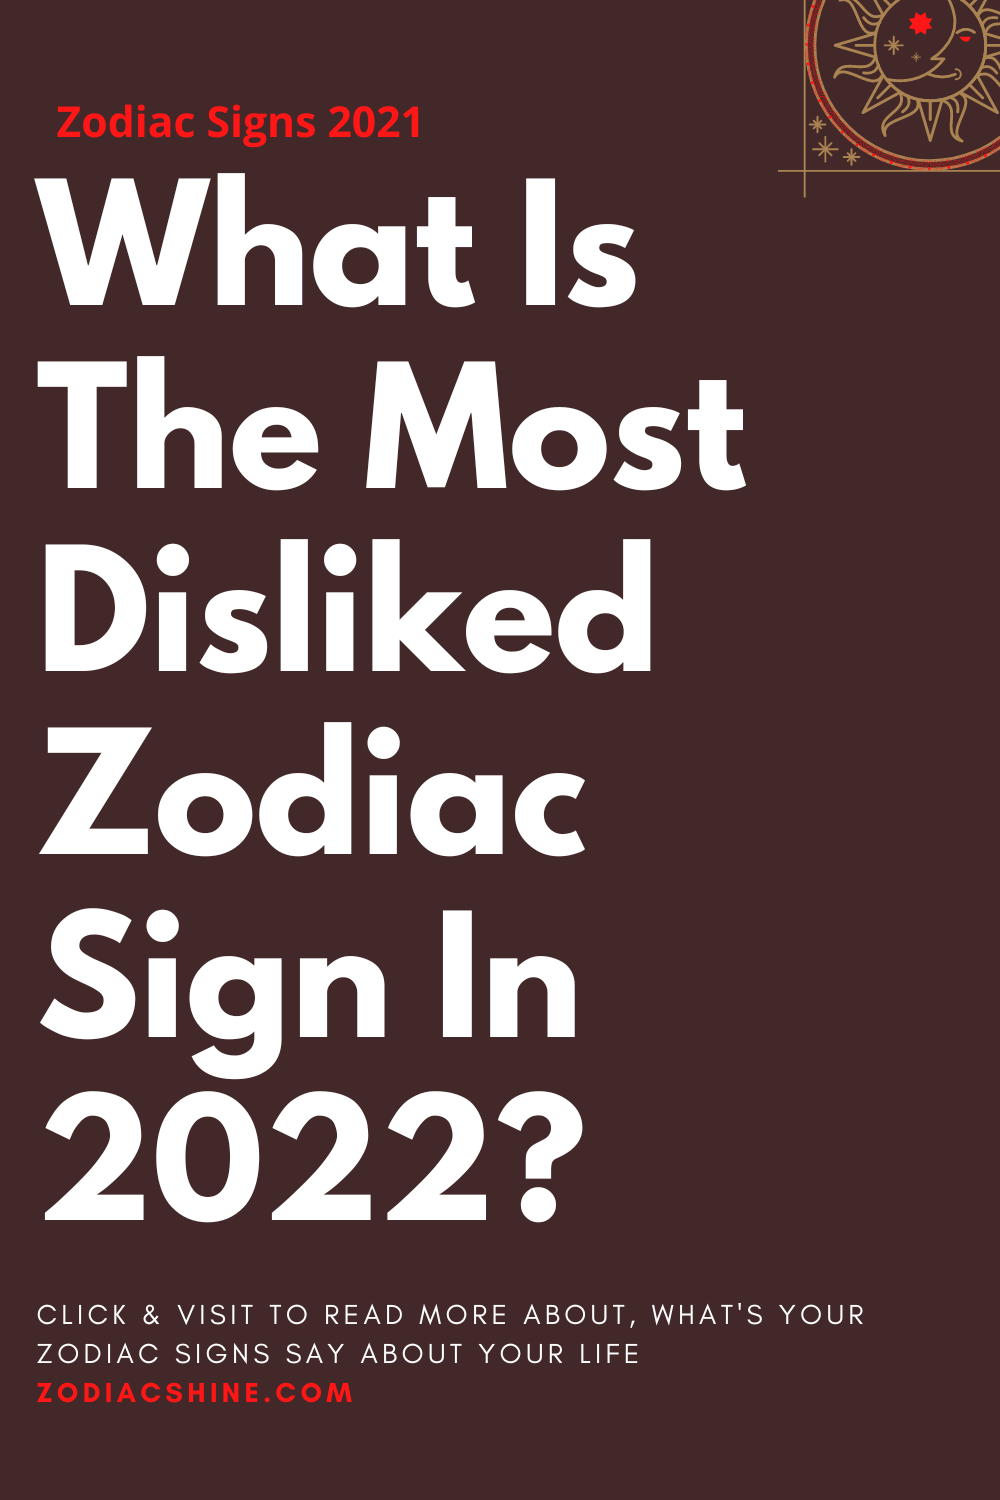 What Is The Most Disliked Zodiac Sign In 2022?